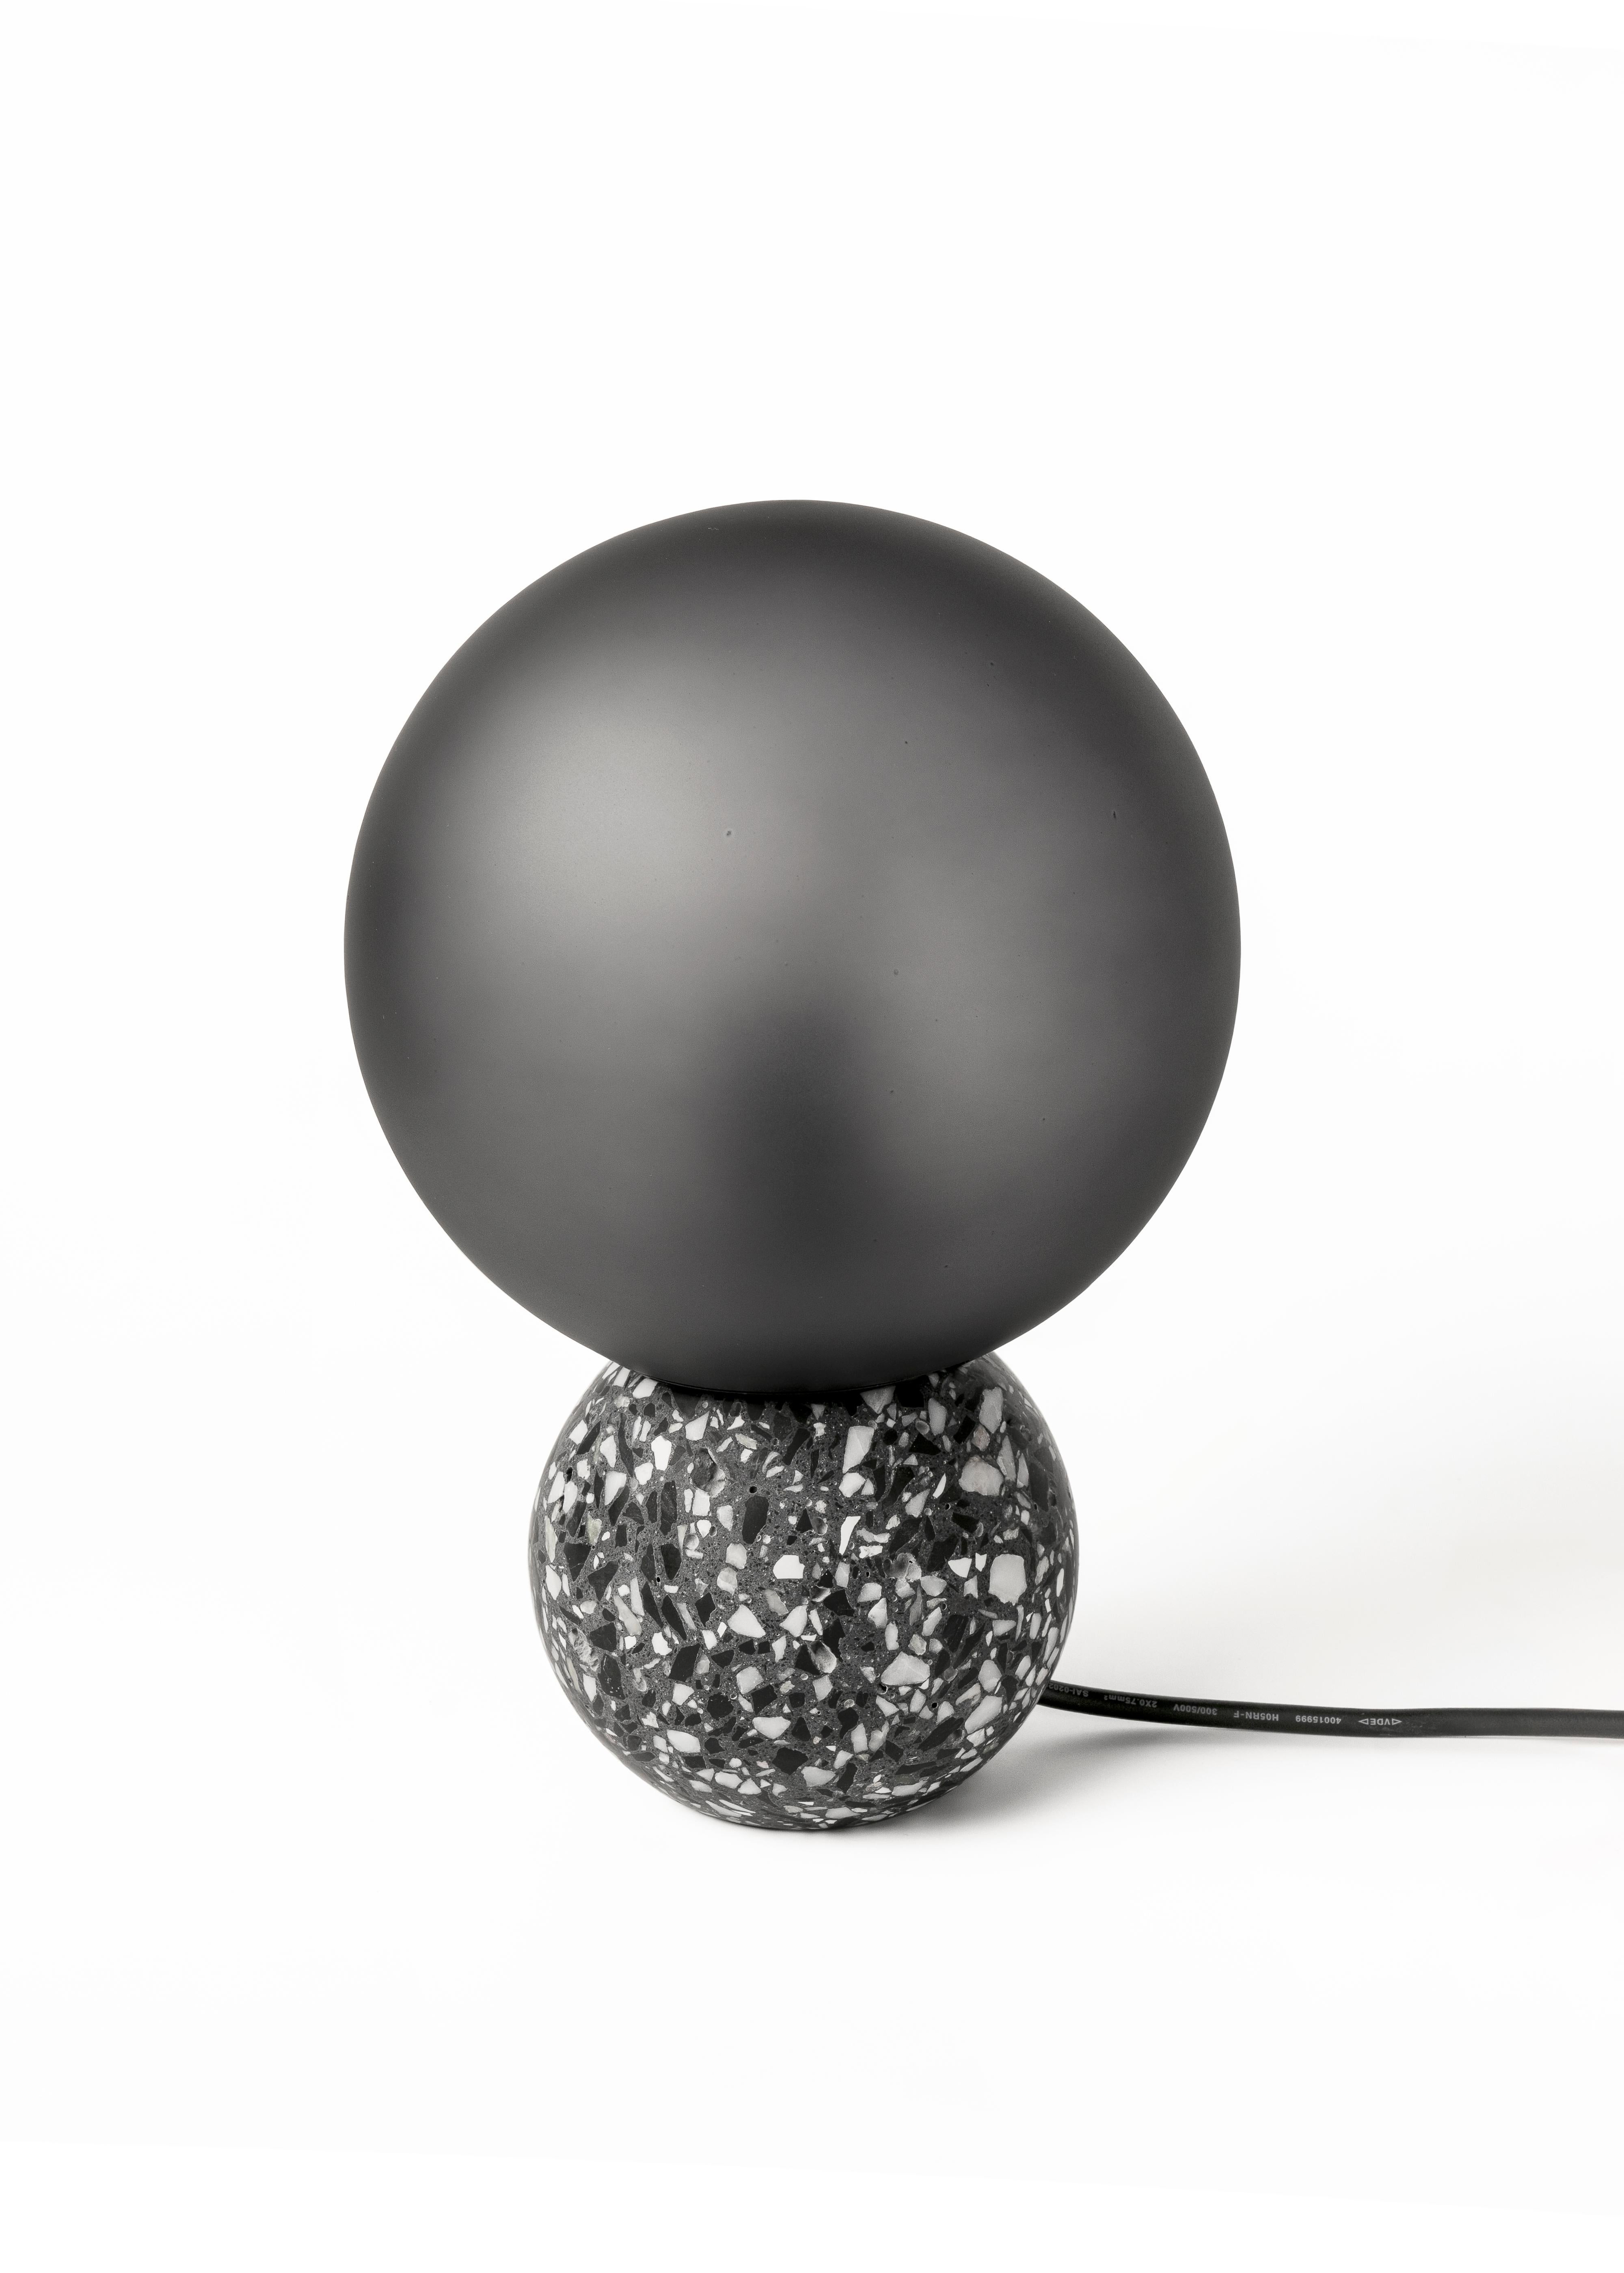 '8' table lamp in terrazzo (Black / white)

Measures: Ø20 cm × H 29.5 cm

Bulb: E27 LED 3W 100-240V 80Ra 200LM 3000K - Comptable with US electric system.

Bentu Design furniture and lightings derive its uniqueness from the simplicity of its forms